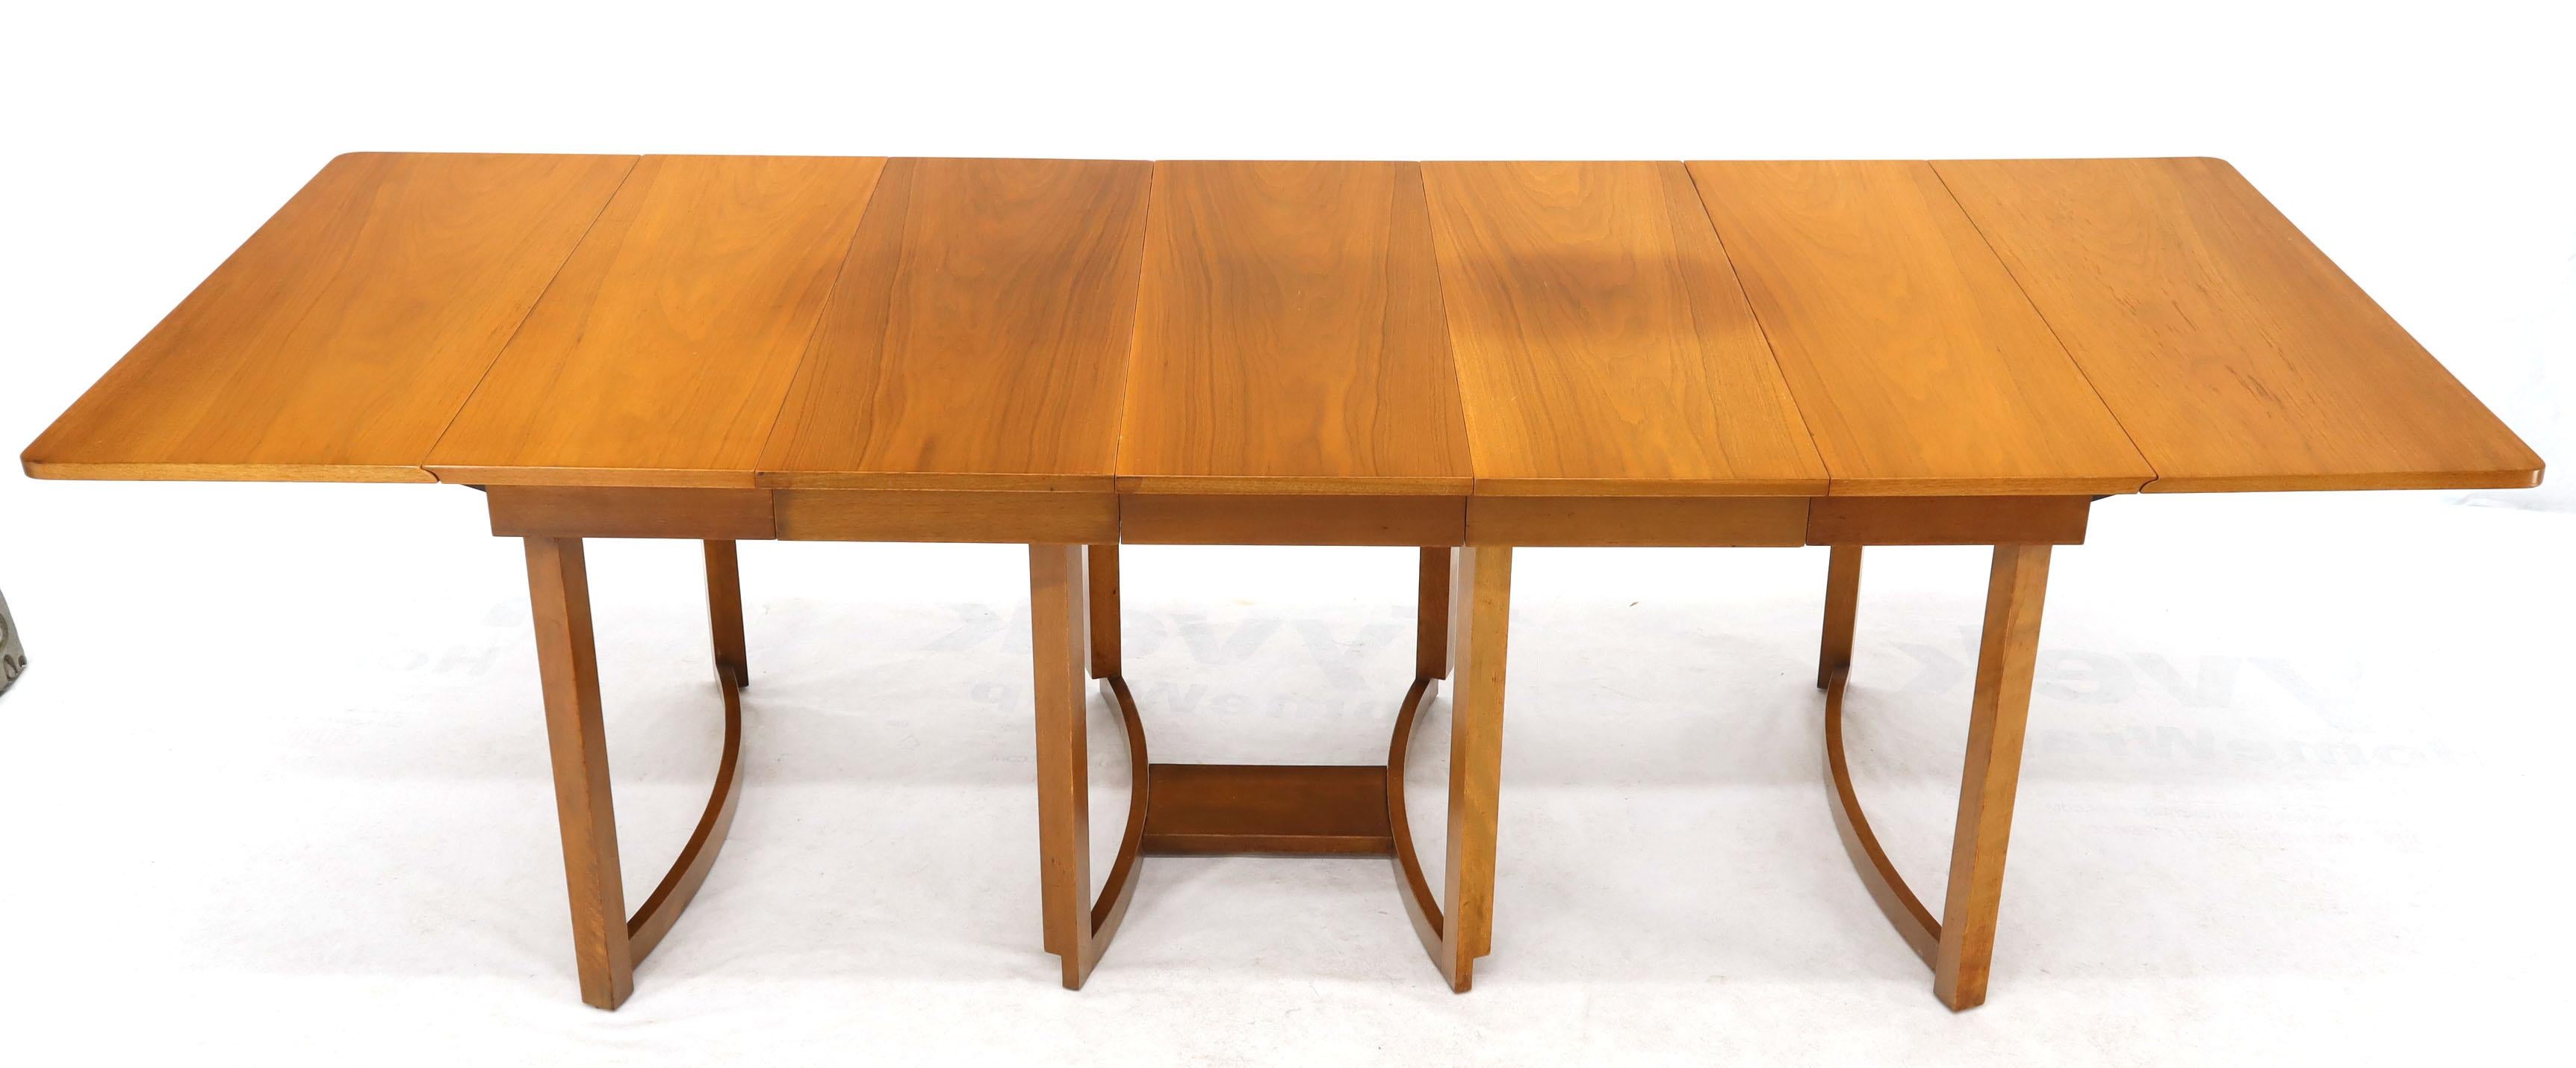 Midcentury Light Walnut Drop Leaf Expandable Dining Table, Three Leafs Boards im Angebot 8